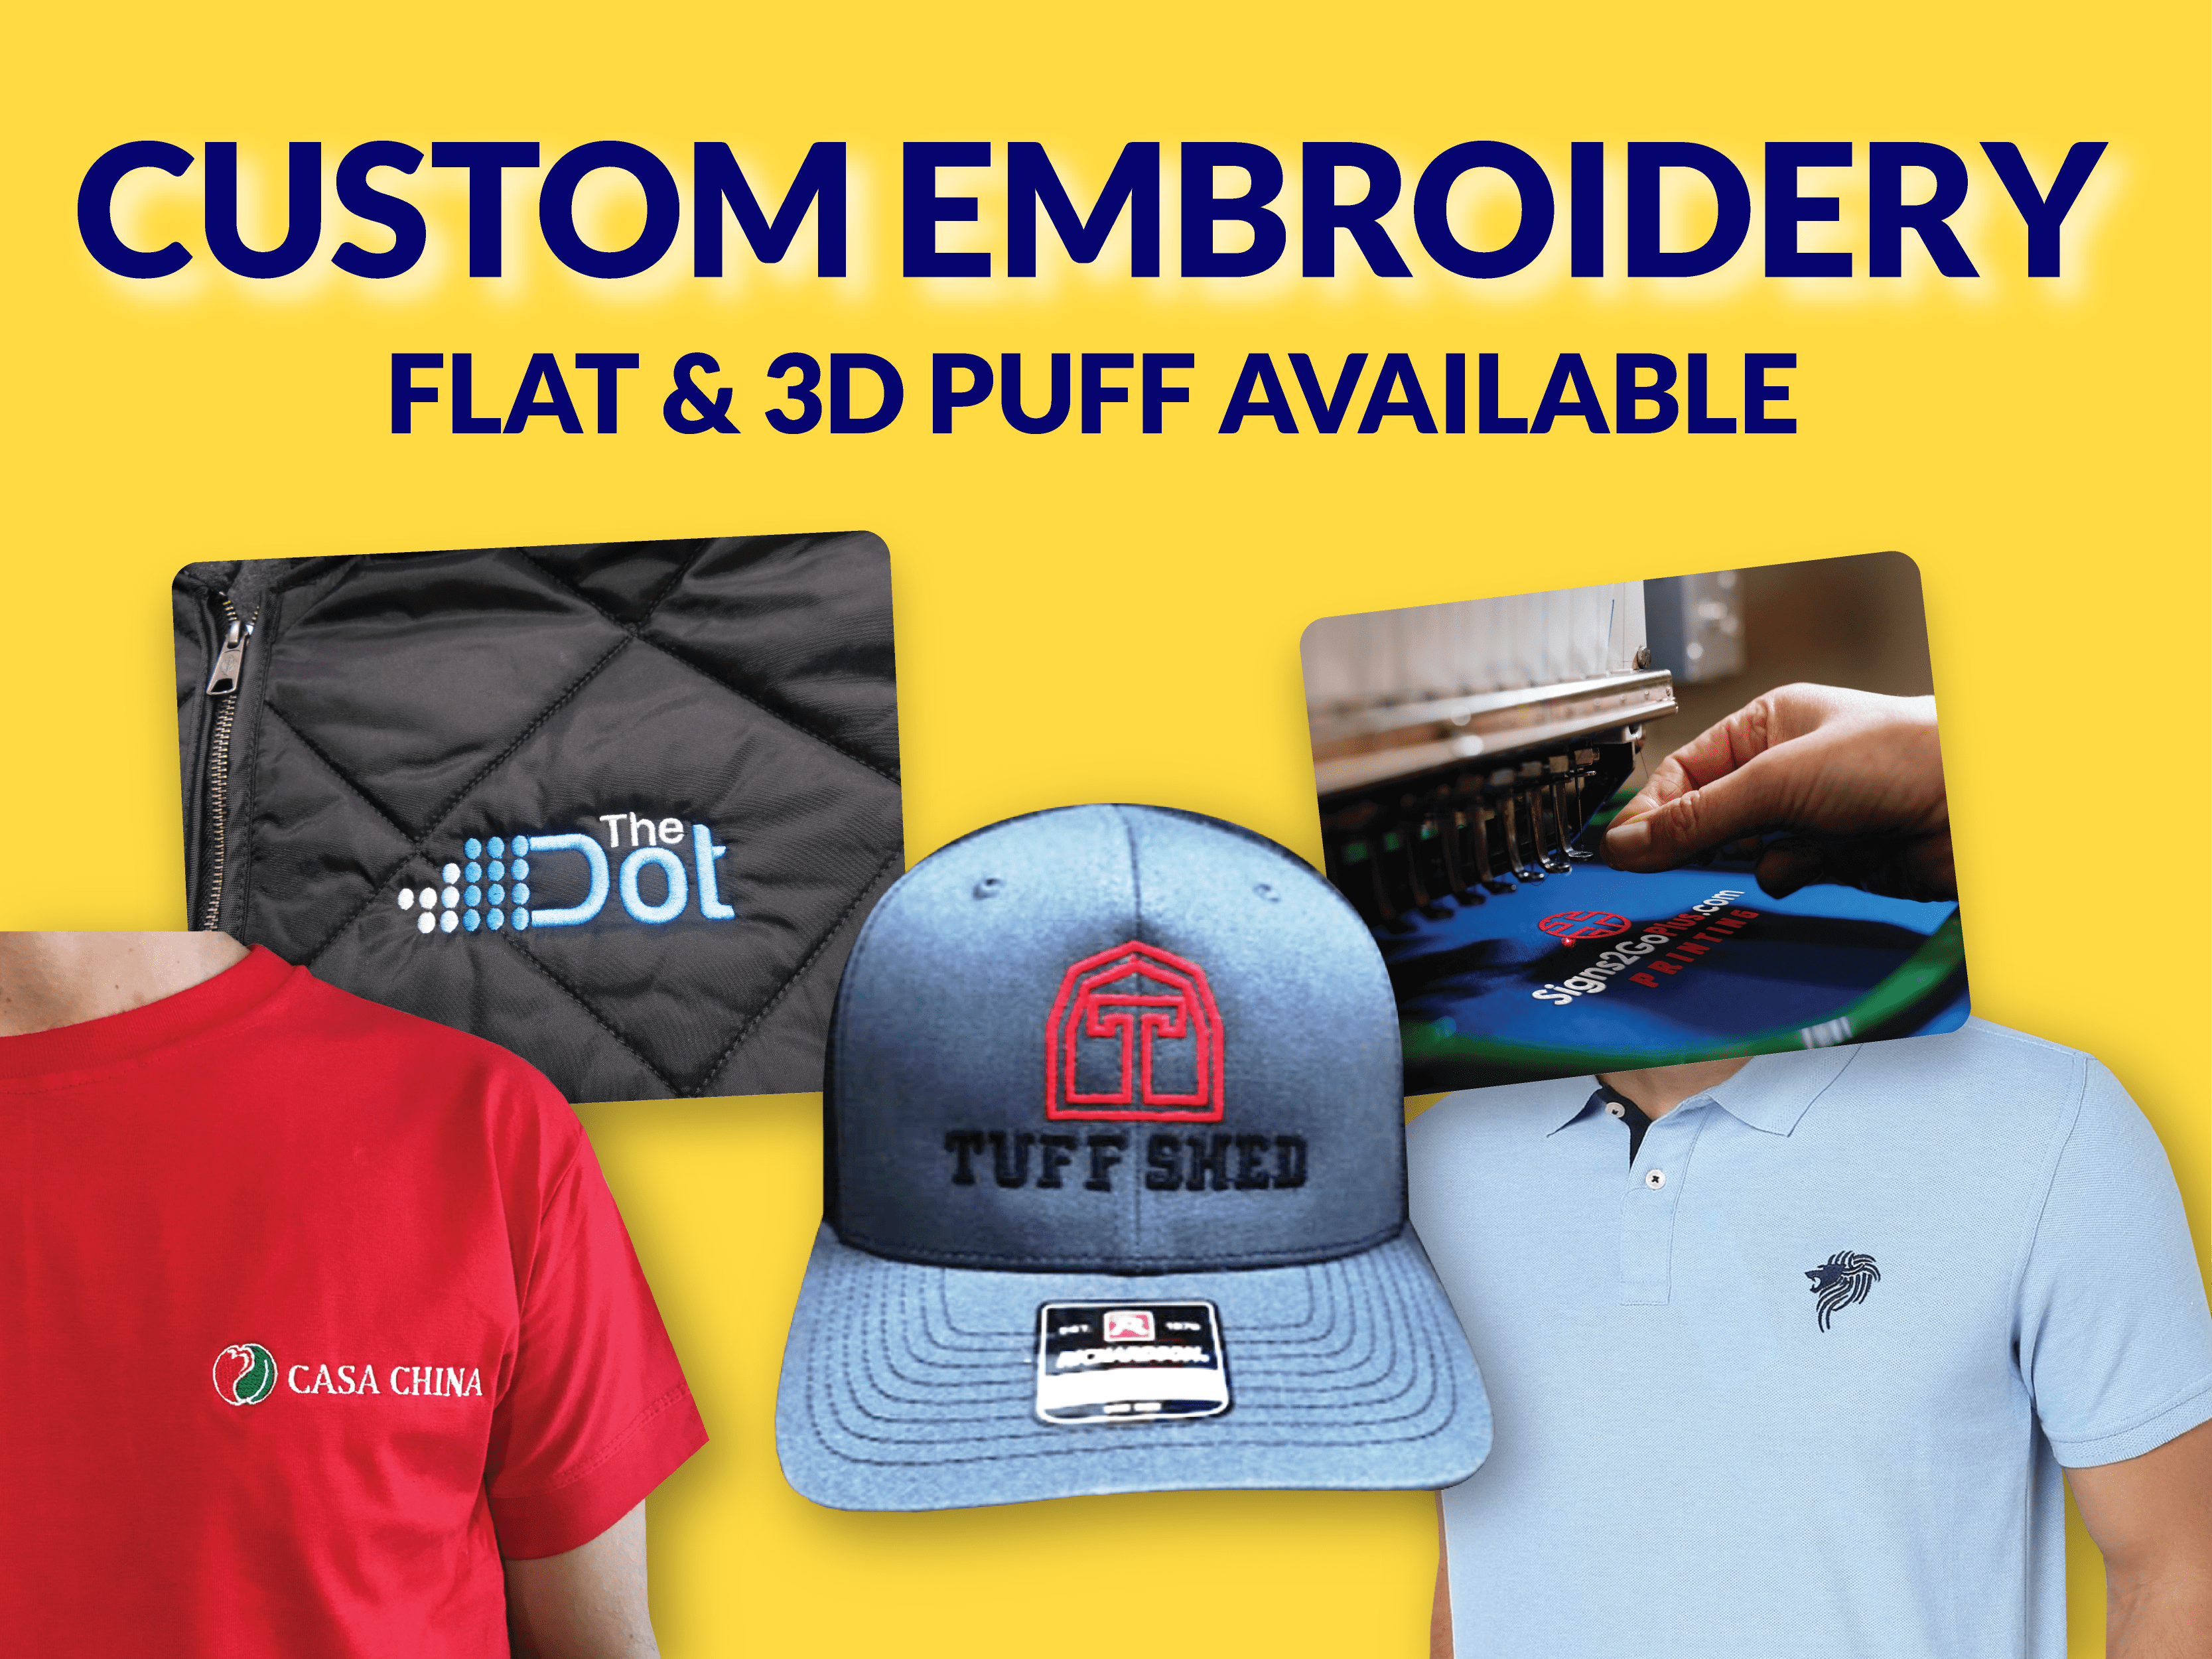 This image refers to our Custom Embroidery promotion. Flat & 3D Puff Available! To learn more about Custom Embroidery, feel free to check out the 'Products' section in the menu. Happy exploring!